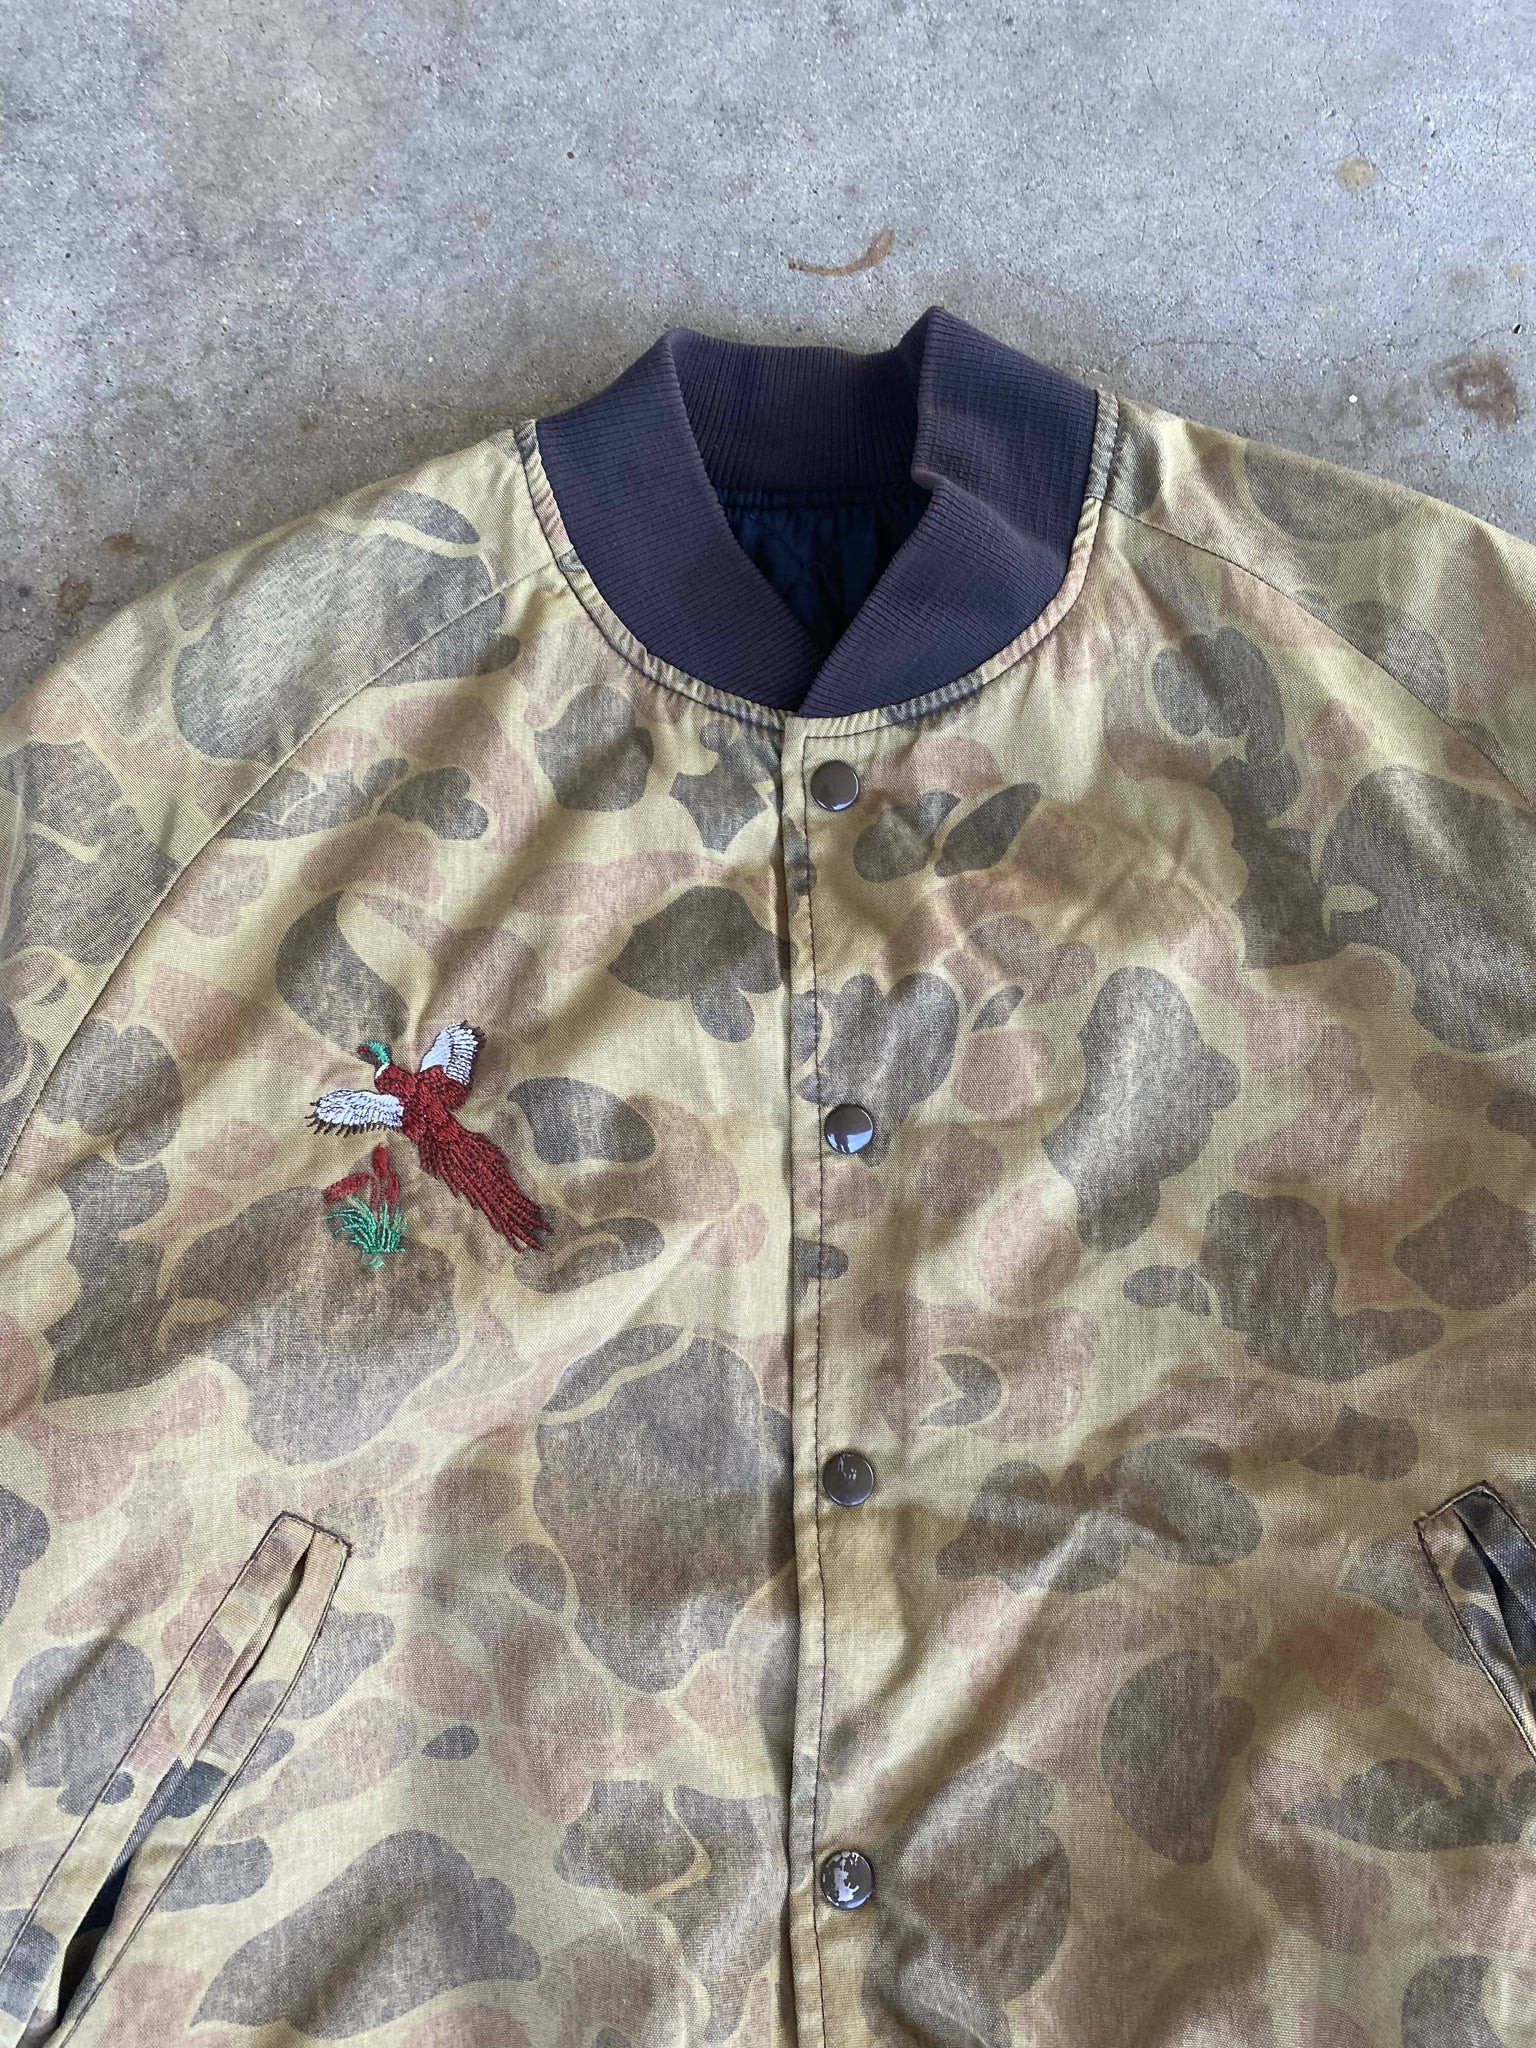 Vintage Pheasant Embroidered Duck Camo Bomber Jacket (L/XL) – Camoretro